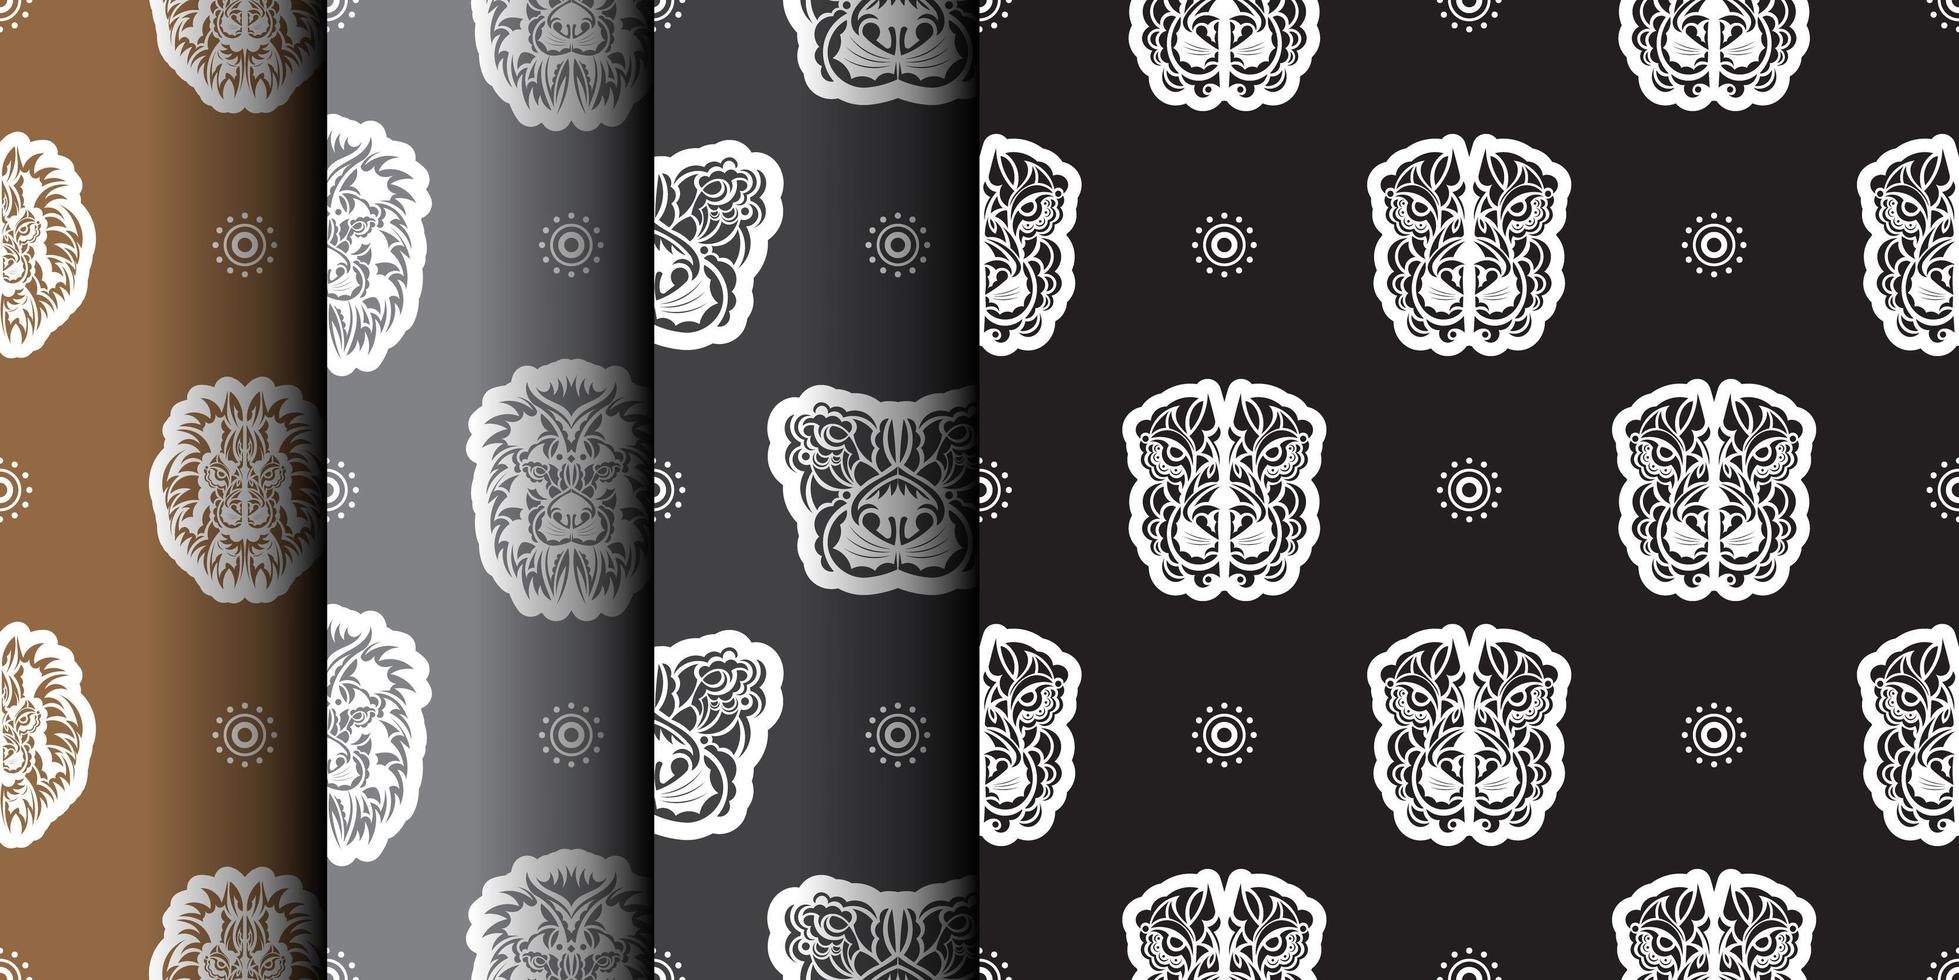 Set of Seamless pattern with a lion's head in a simple style. Good for backgrounds and prints. Vector illustration.